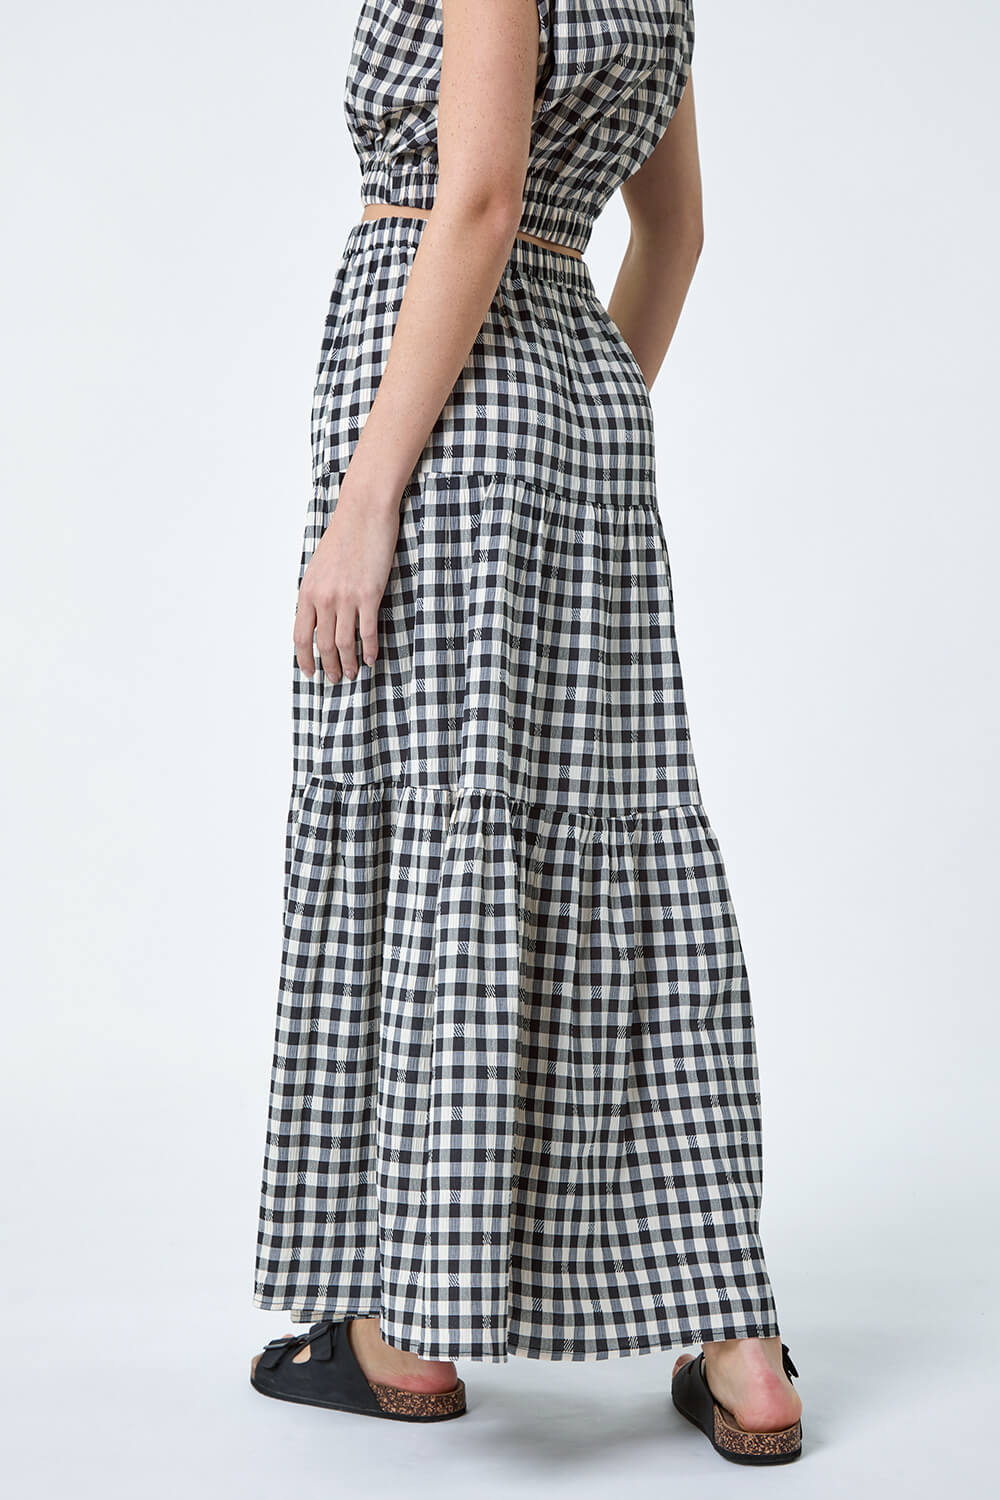 Black Gingham Check Tiered Maxi Skirt, Image 3 of 7